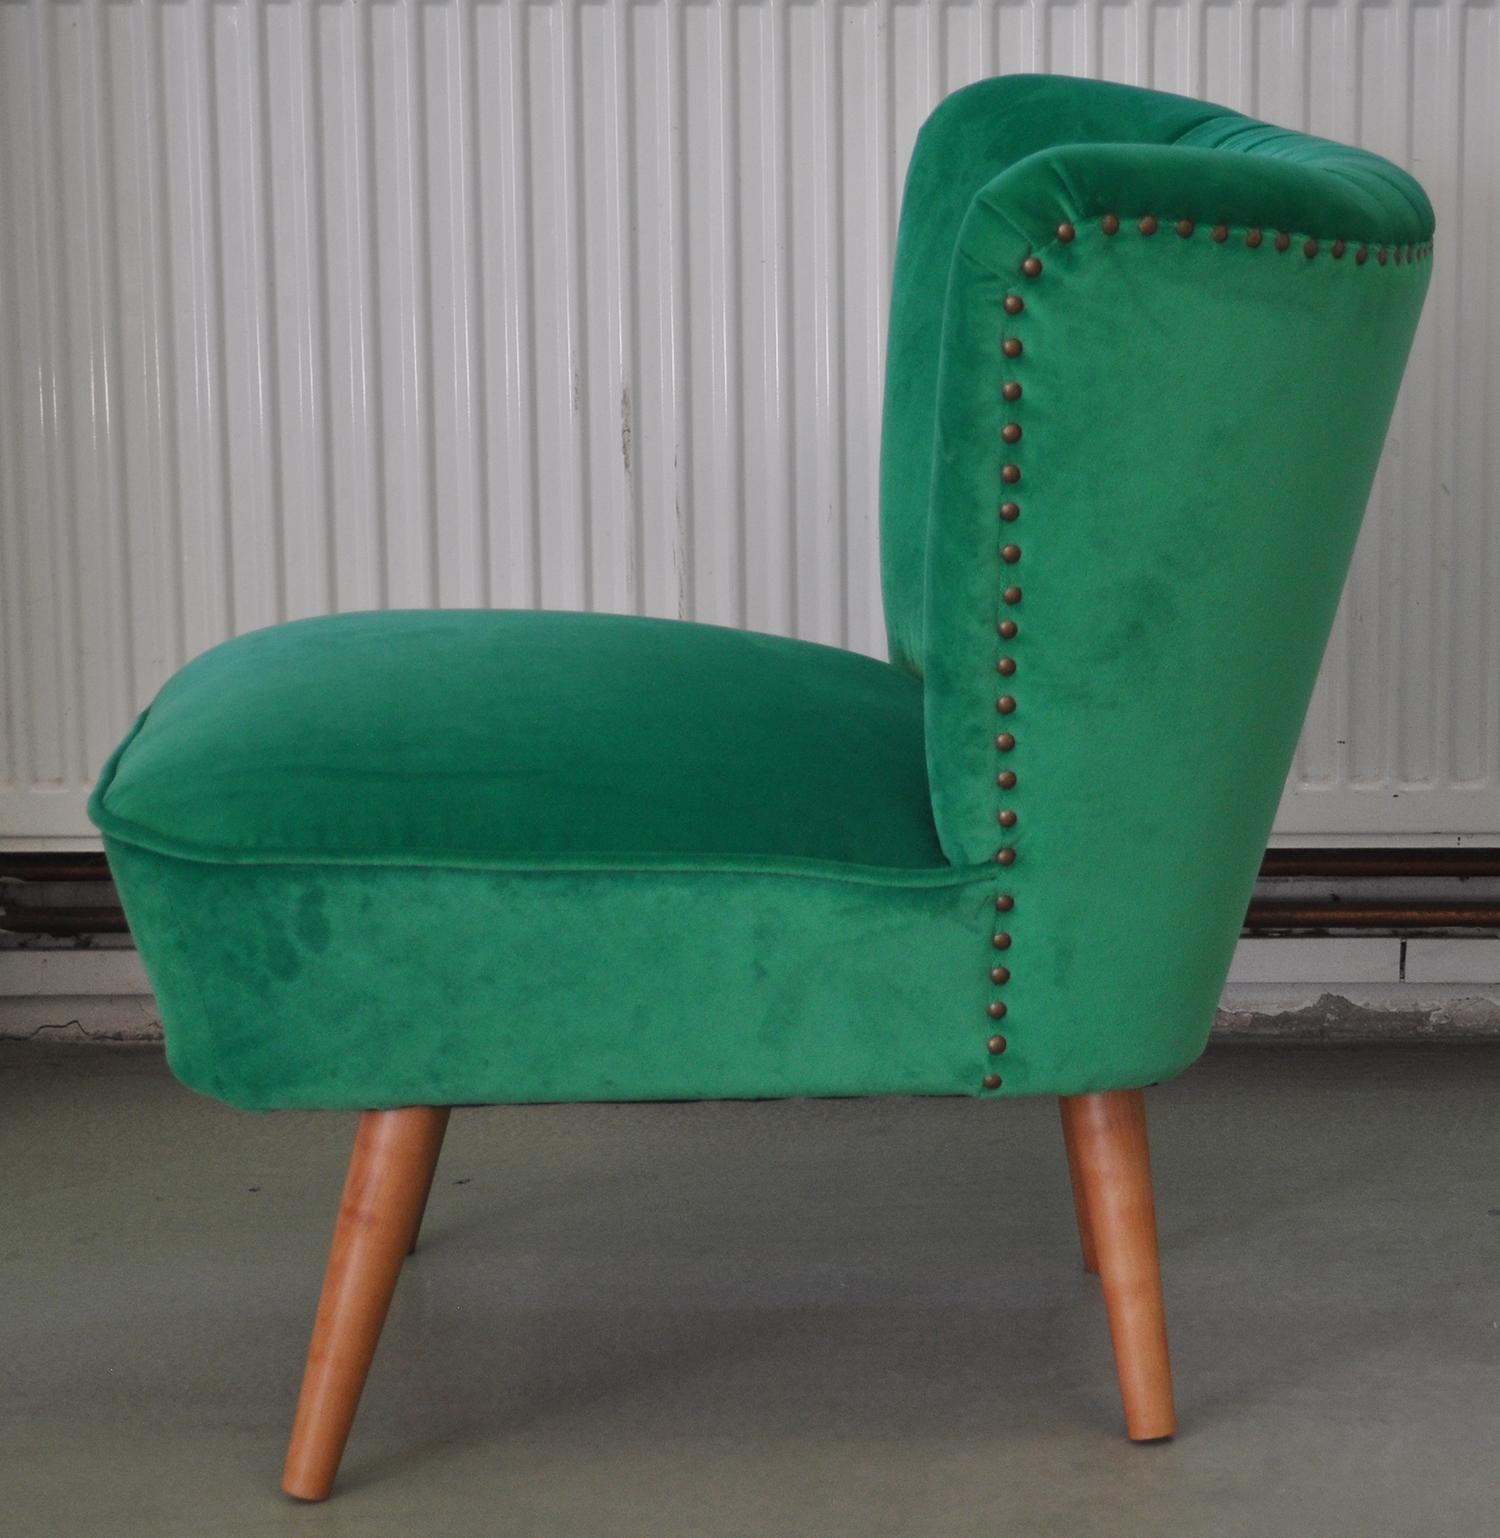 Cocktail Chair with a Green Fabric im Angebot 1